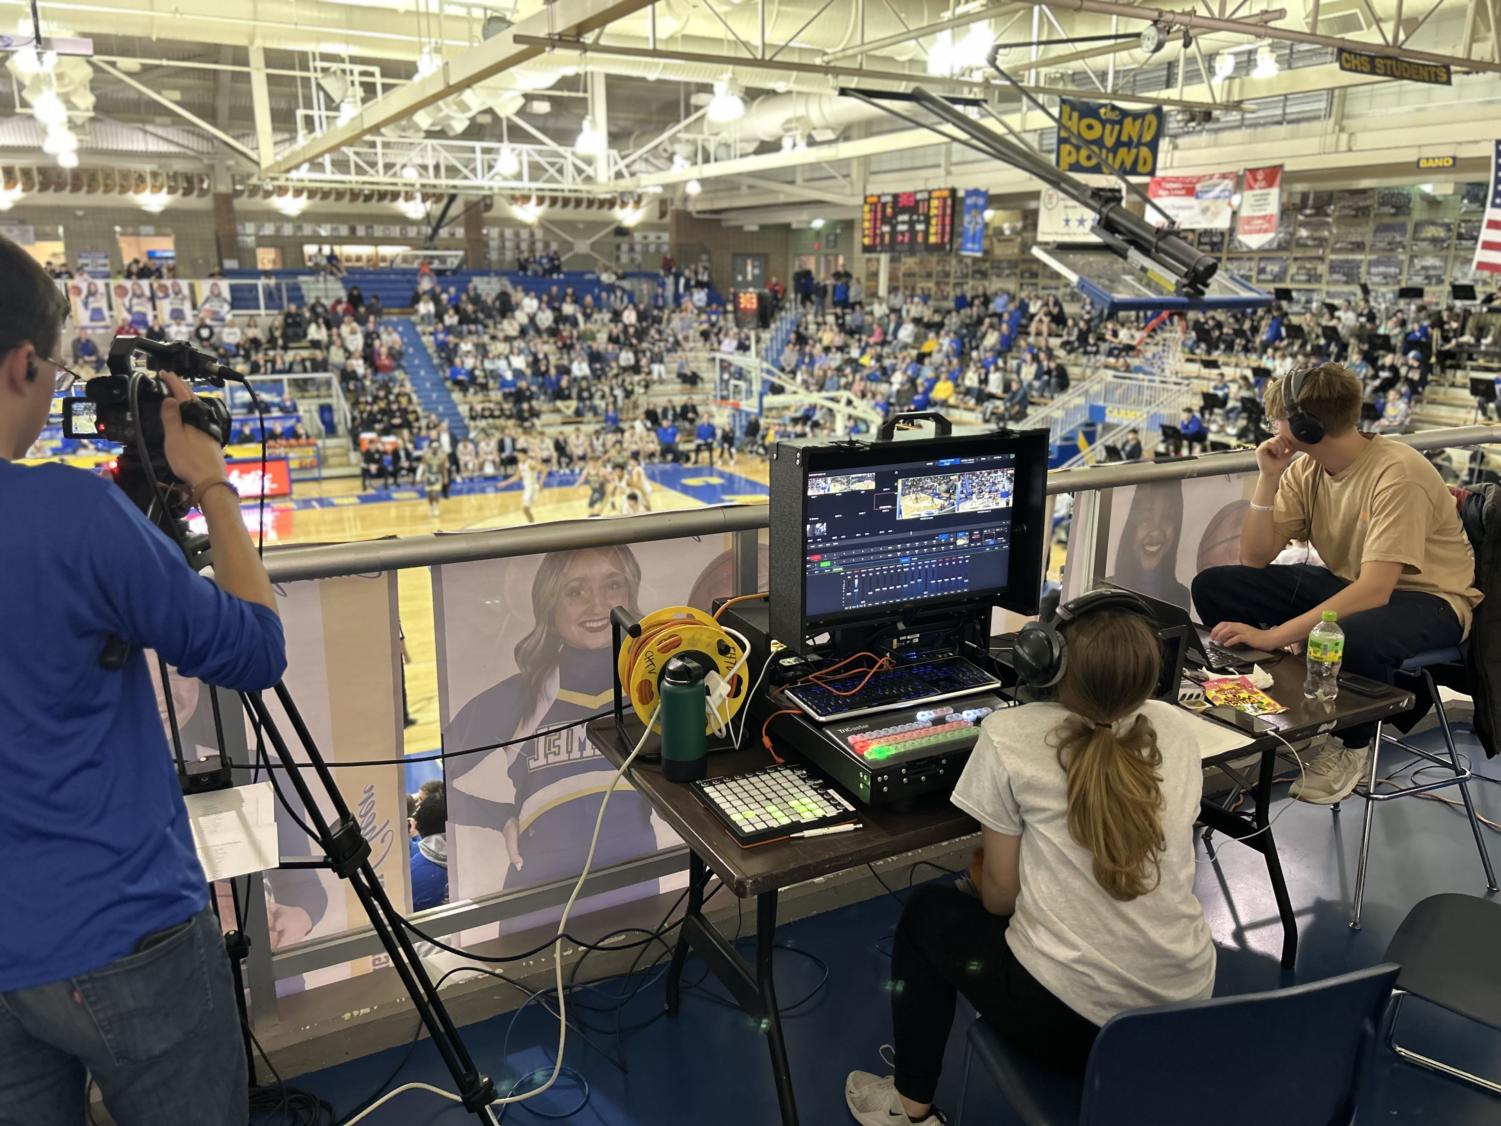 CHTV covering a Carmel basketball game